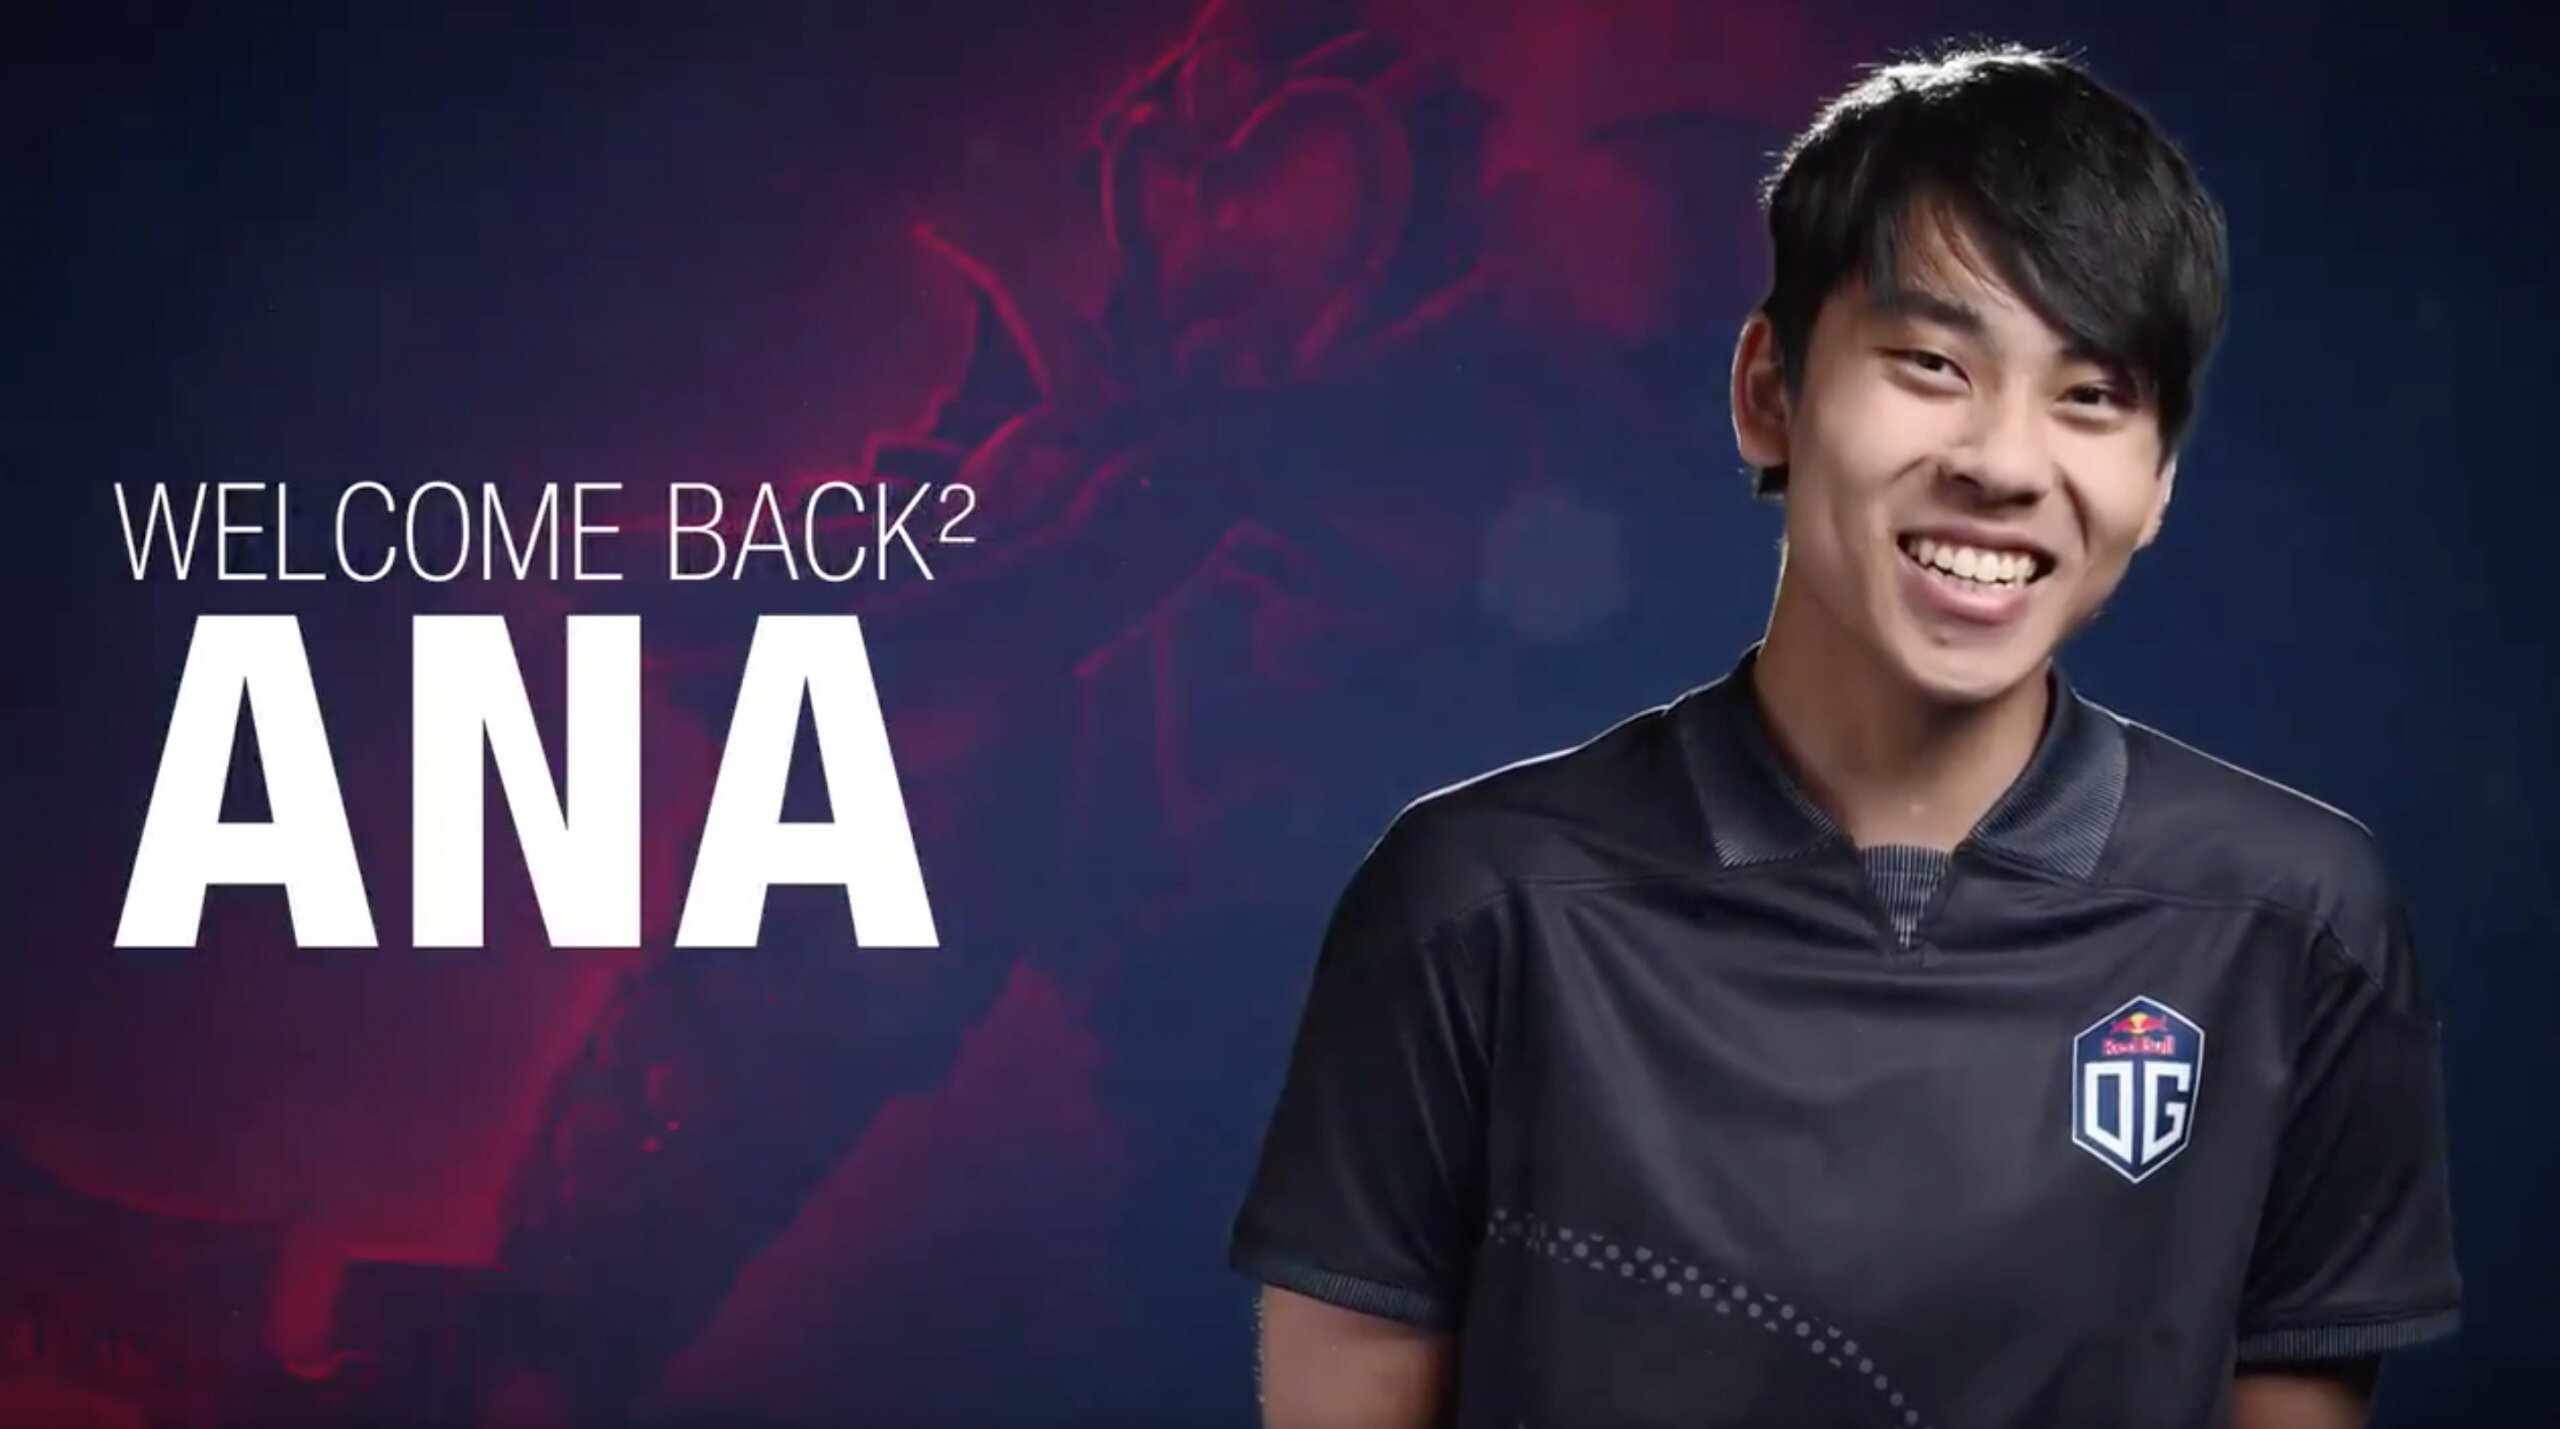 ana, The nineteen-year-old Australian carry player, is now doing his third tour with OG.